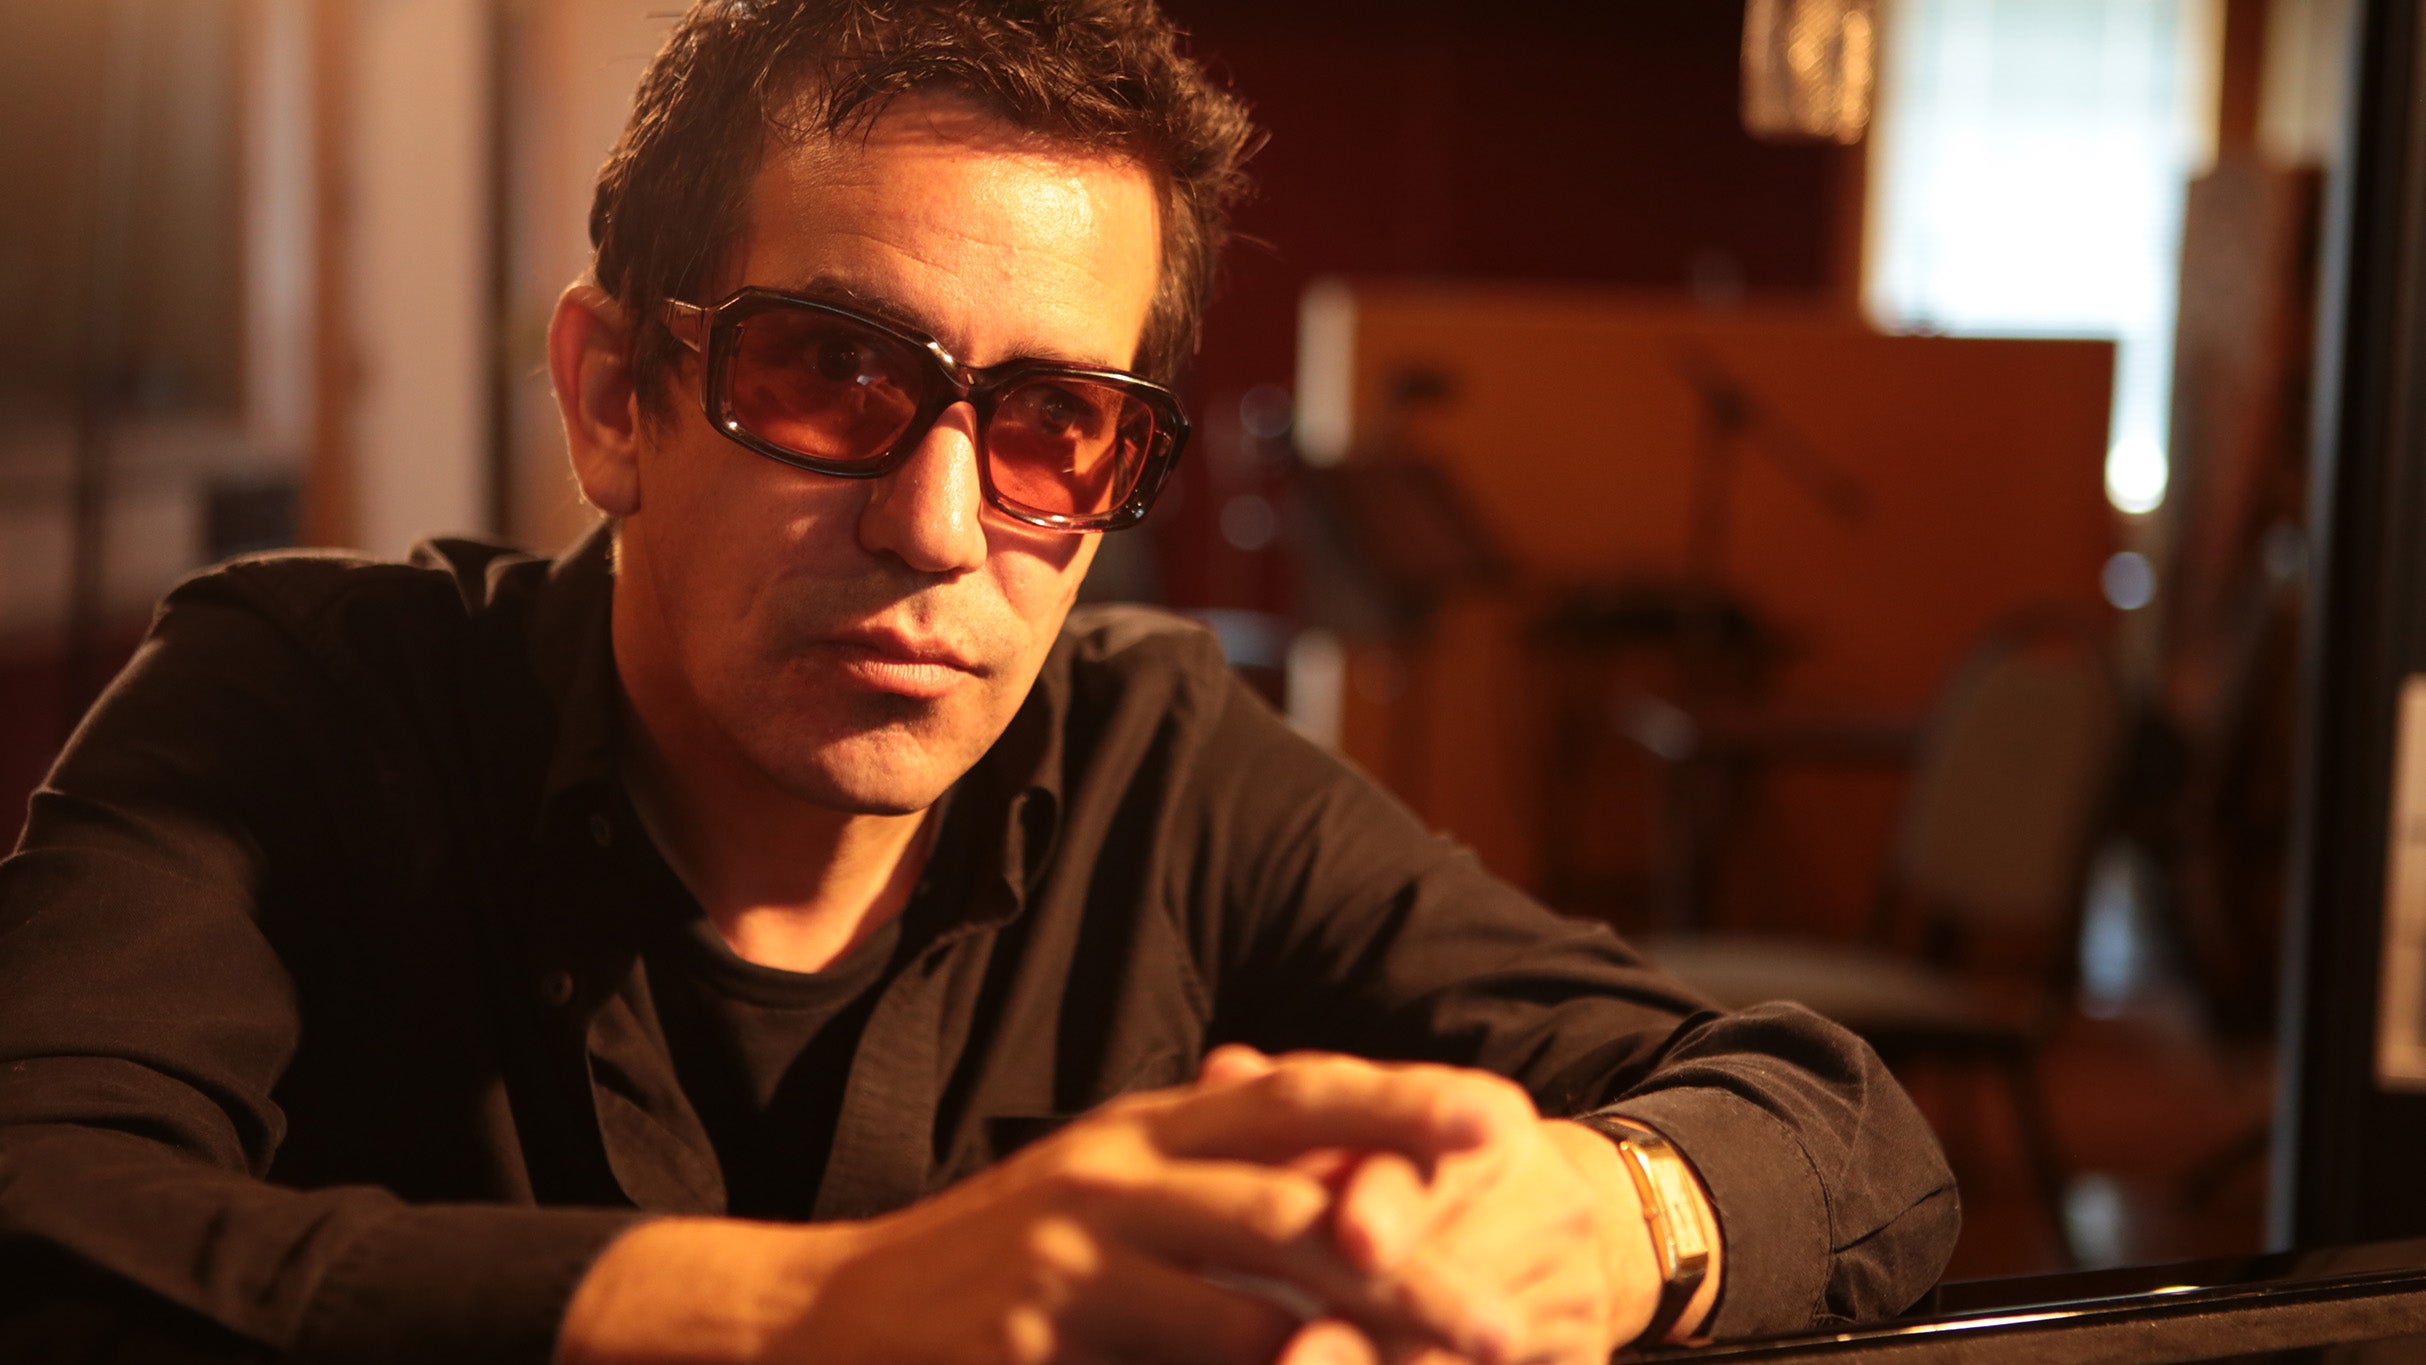 A.J. Croce Presents Croce Plays Croce 50th Anniversary Tour free presale password for early tickets in Denver